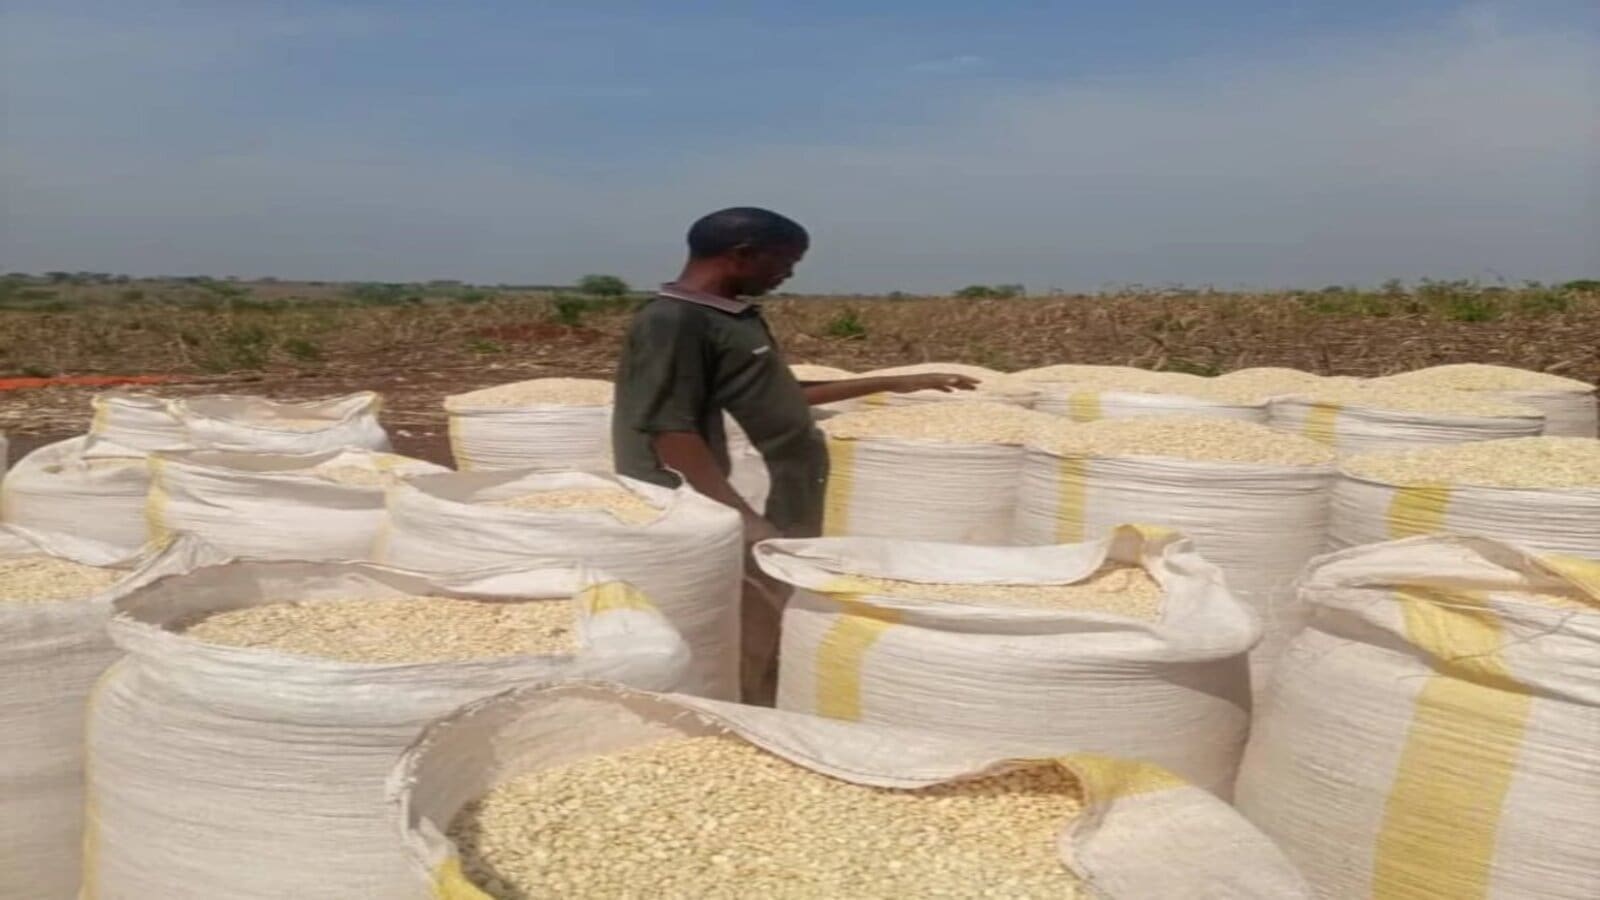 East Africa could have 240,000MT of maize on the market in the second half of the year